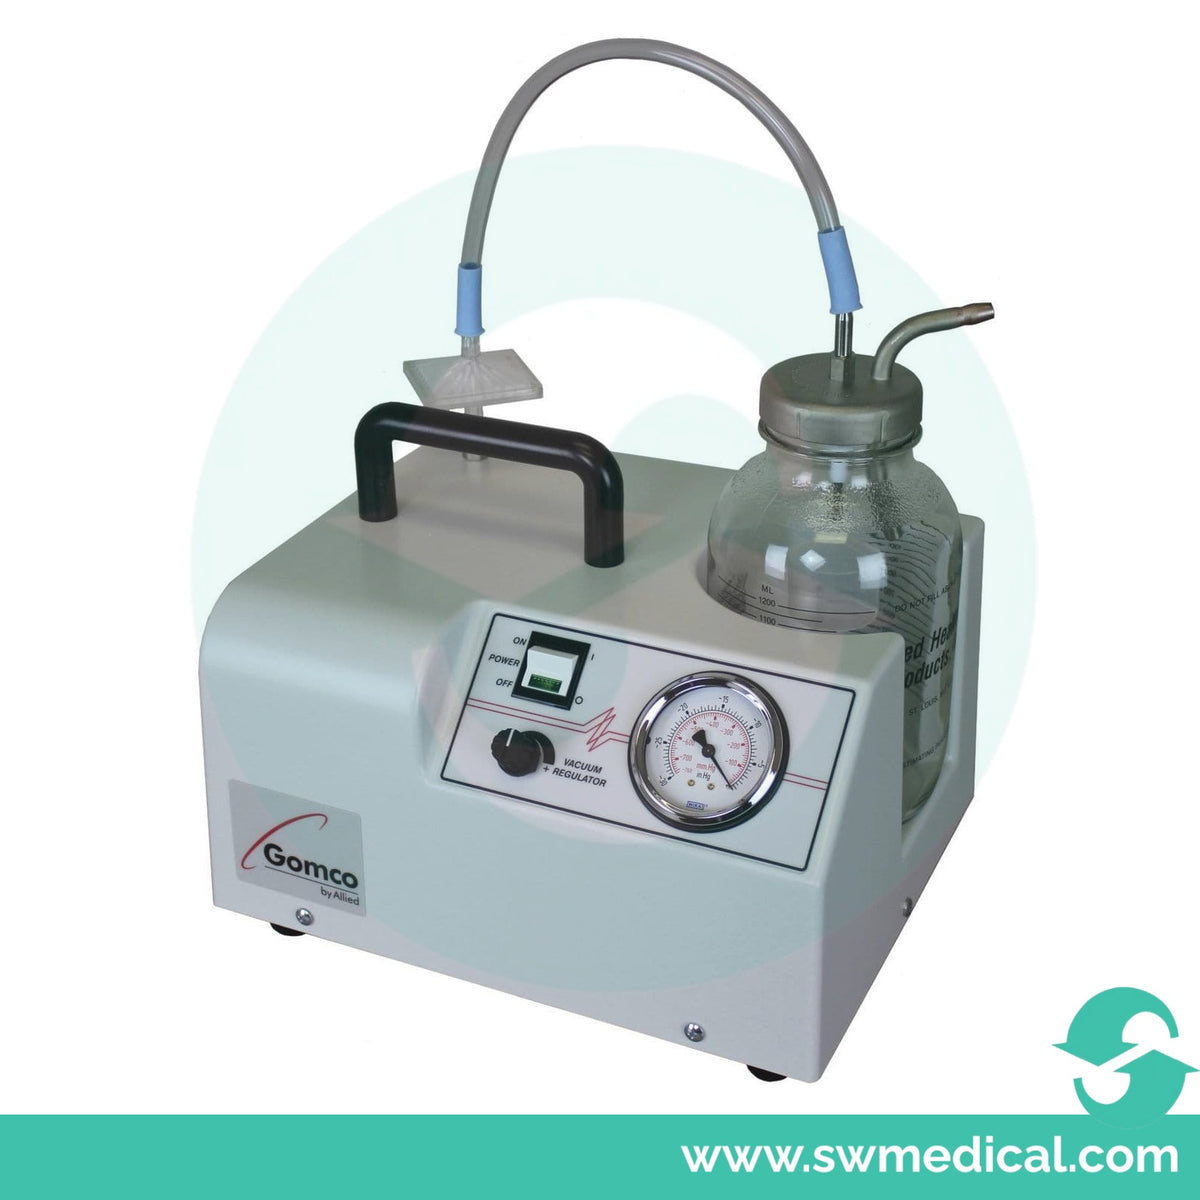 Gomco 405 Tabletop Hospital Suction Unit